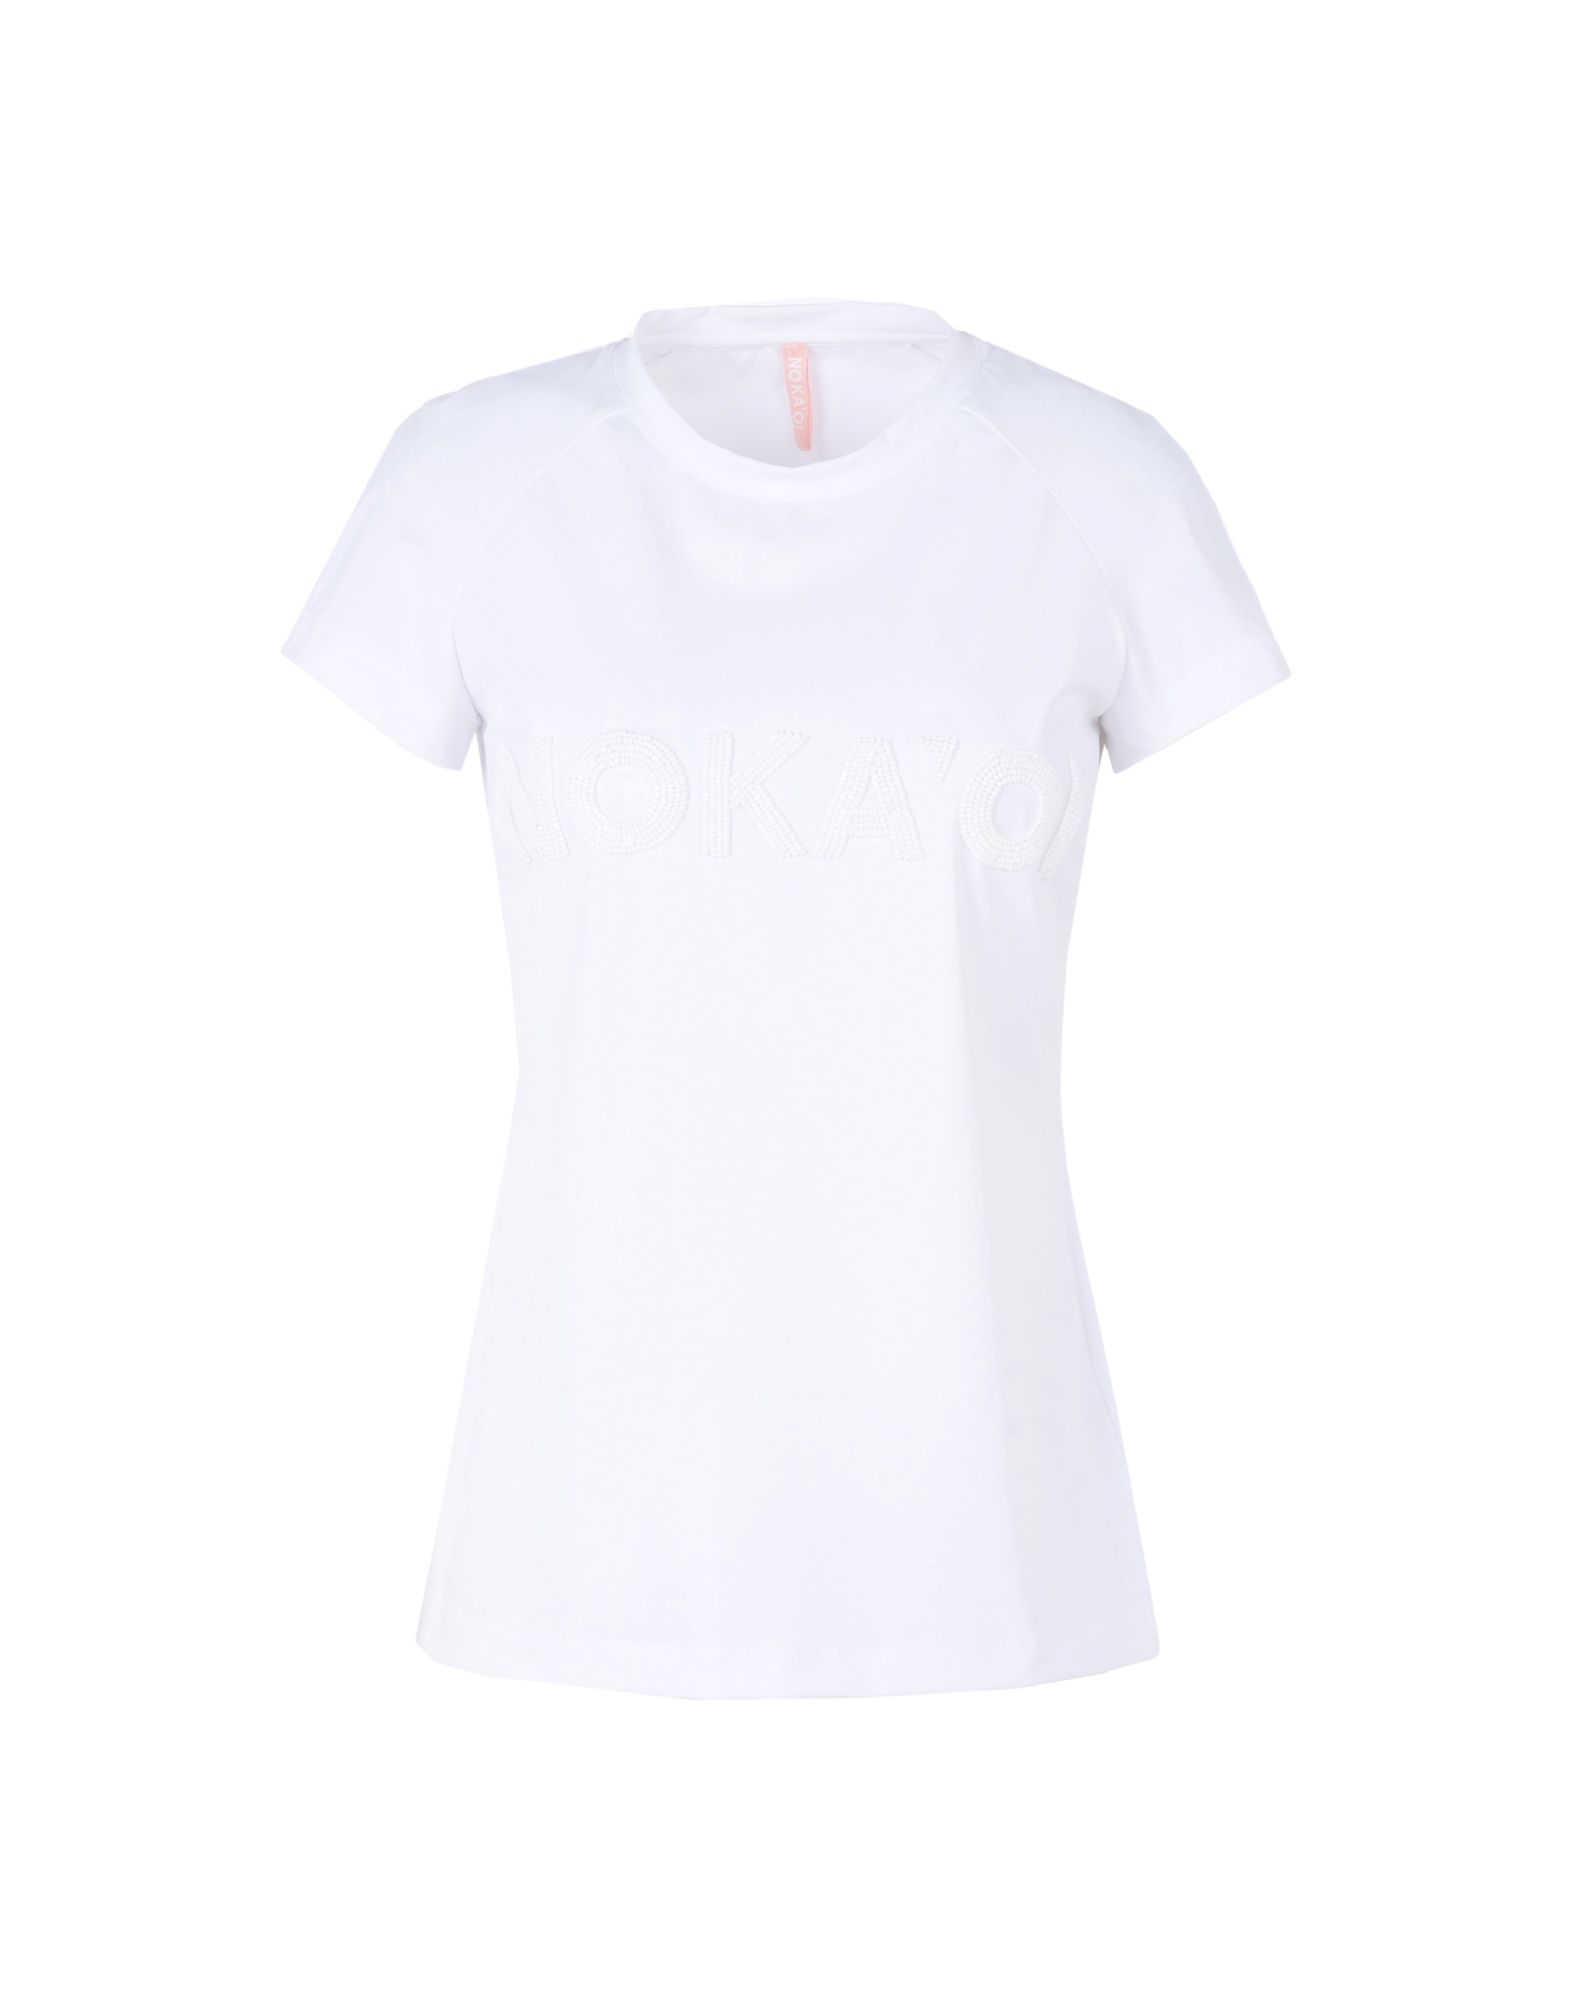 ԥ볫NO KA 'OI ǥ T  ۥ磻 0 ʥ 59% / ݥꥦ쥿 41% UANE T-SHIRT WITH EMBROIDERY